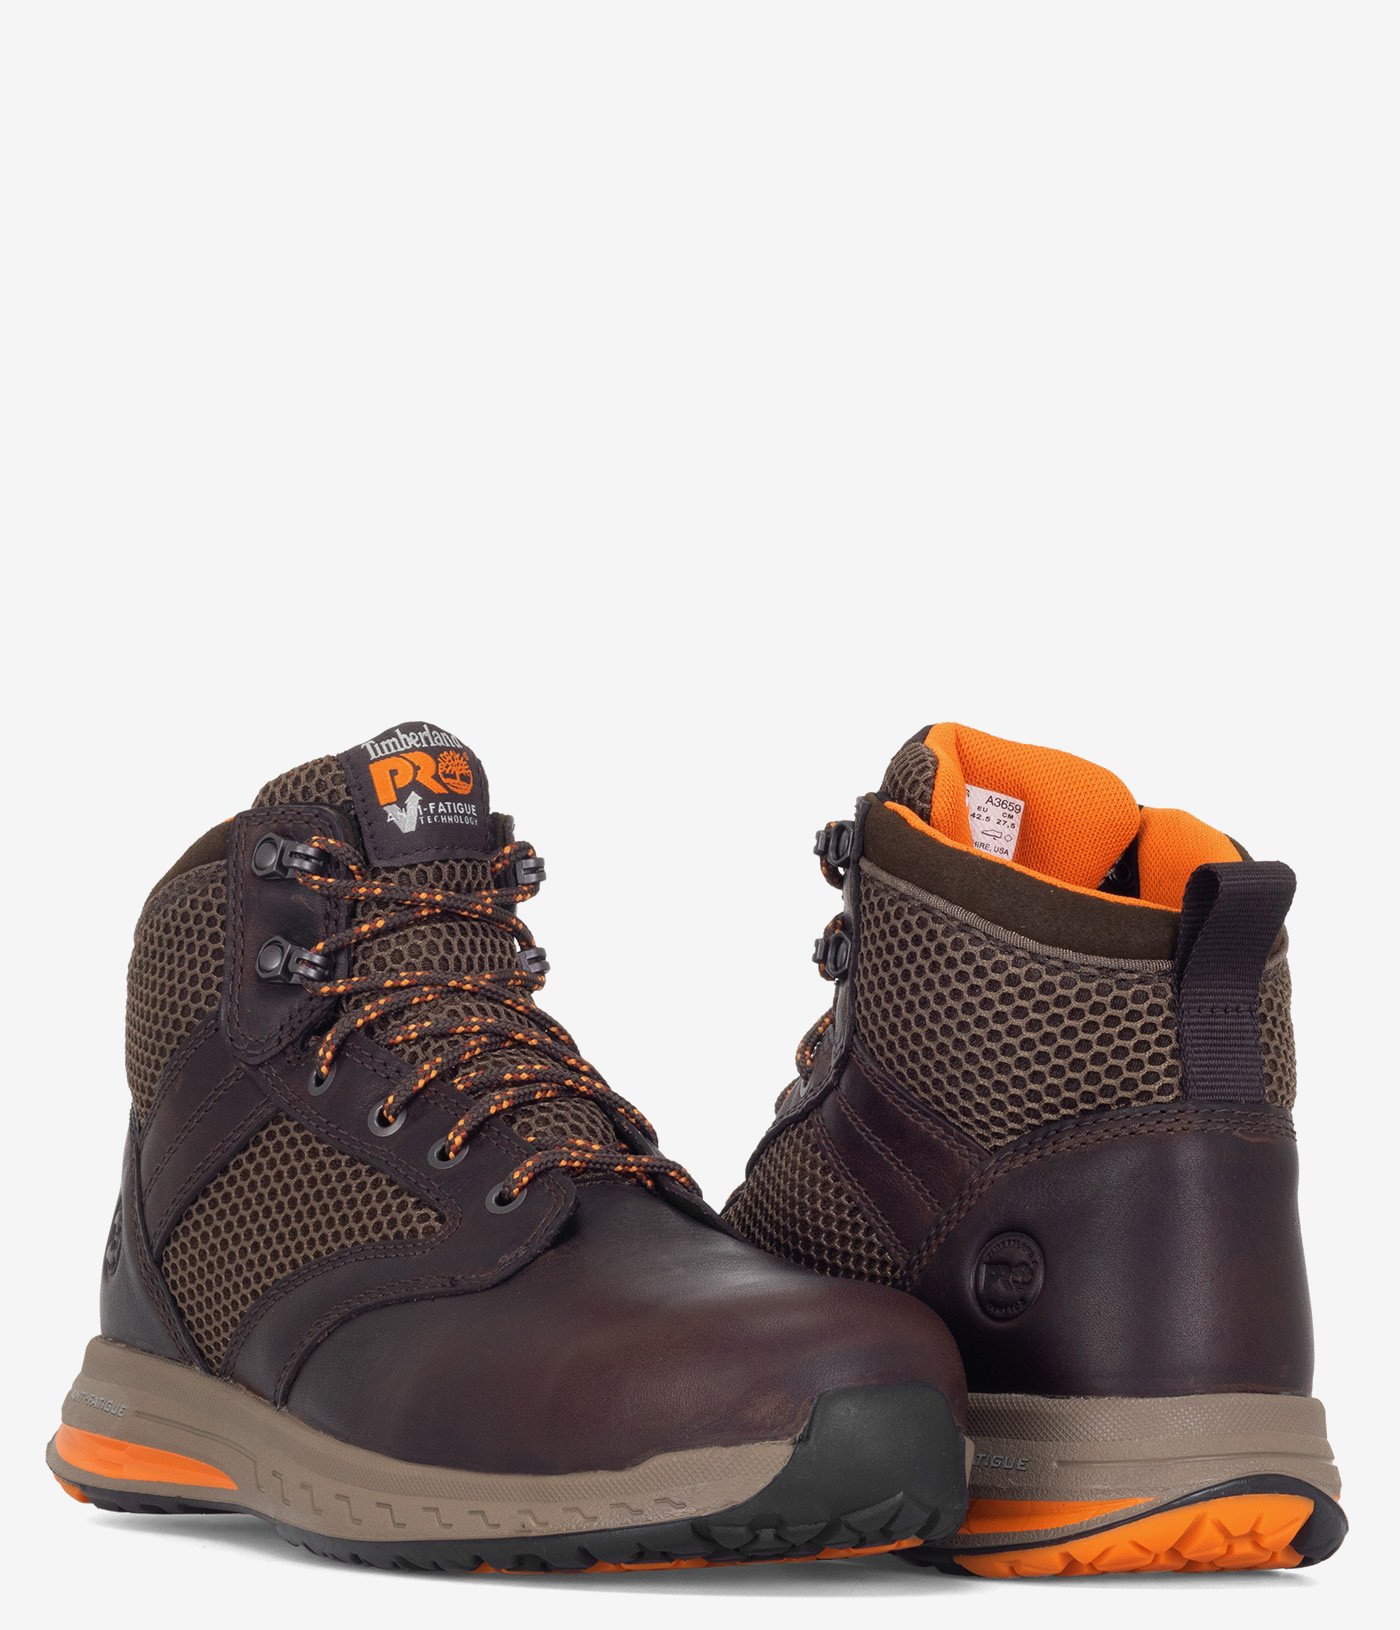 Timberland PRO Drivetrain Mid EH Composite Safety Toe Boot | Pair